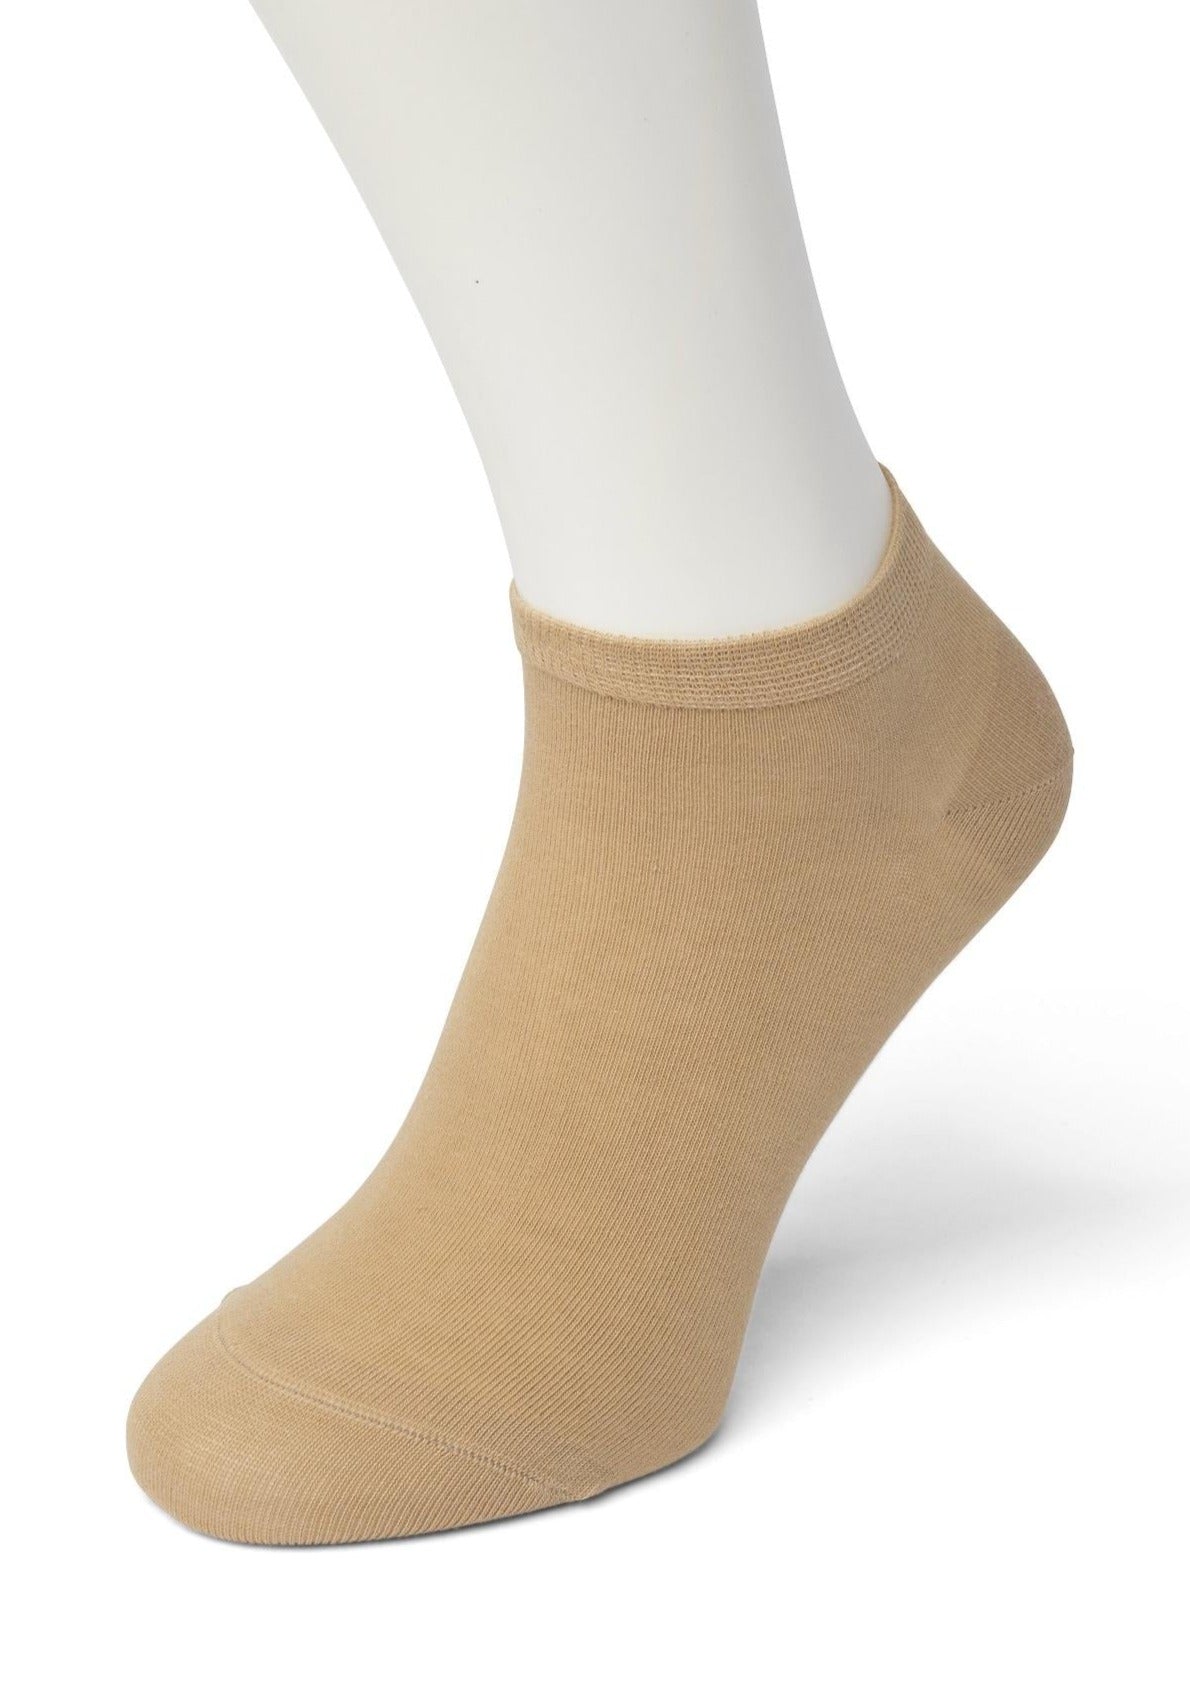 Bonnie Doon BD811001 Cotton Short Ankle Sock - Beige (sand) Low rise cotton mix socks with flat toe seam and plain elasticated cuff. 